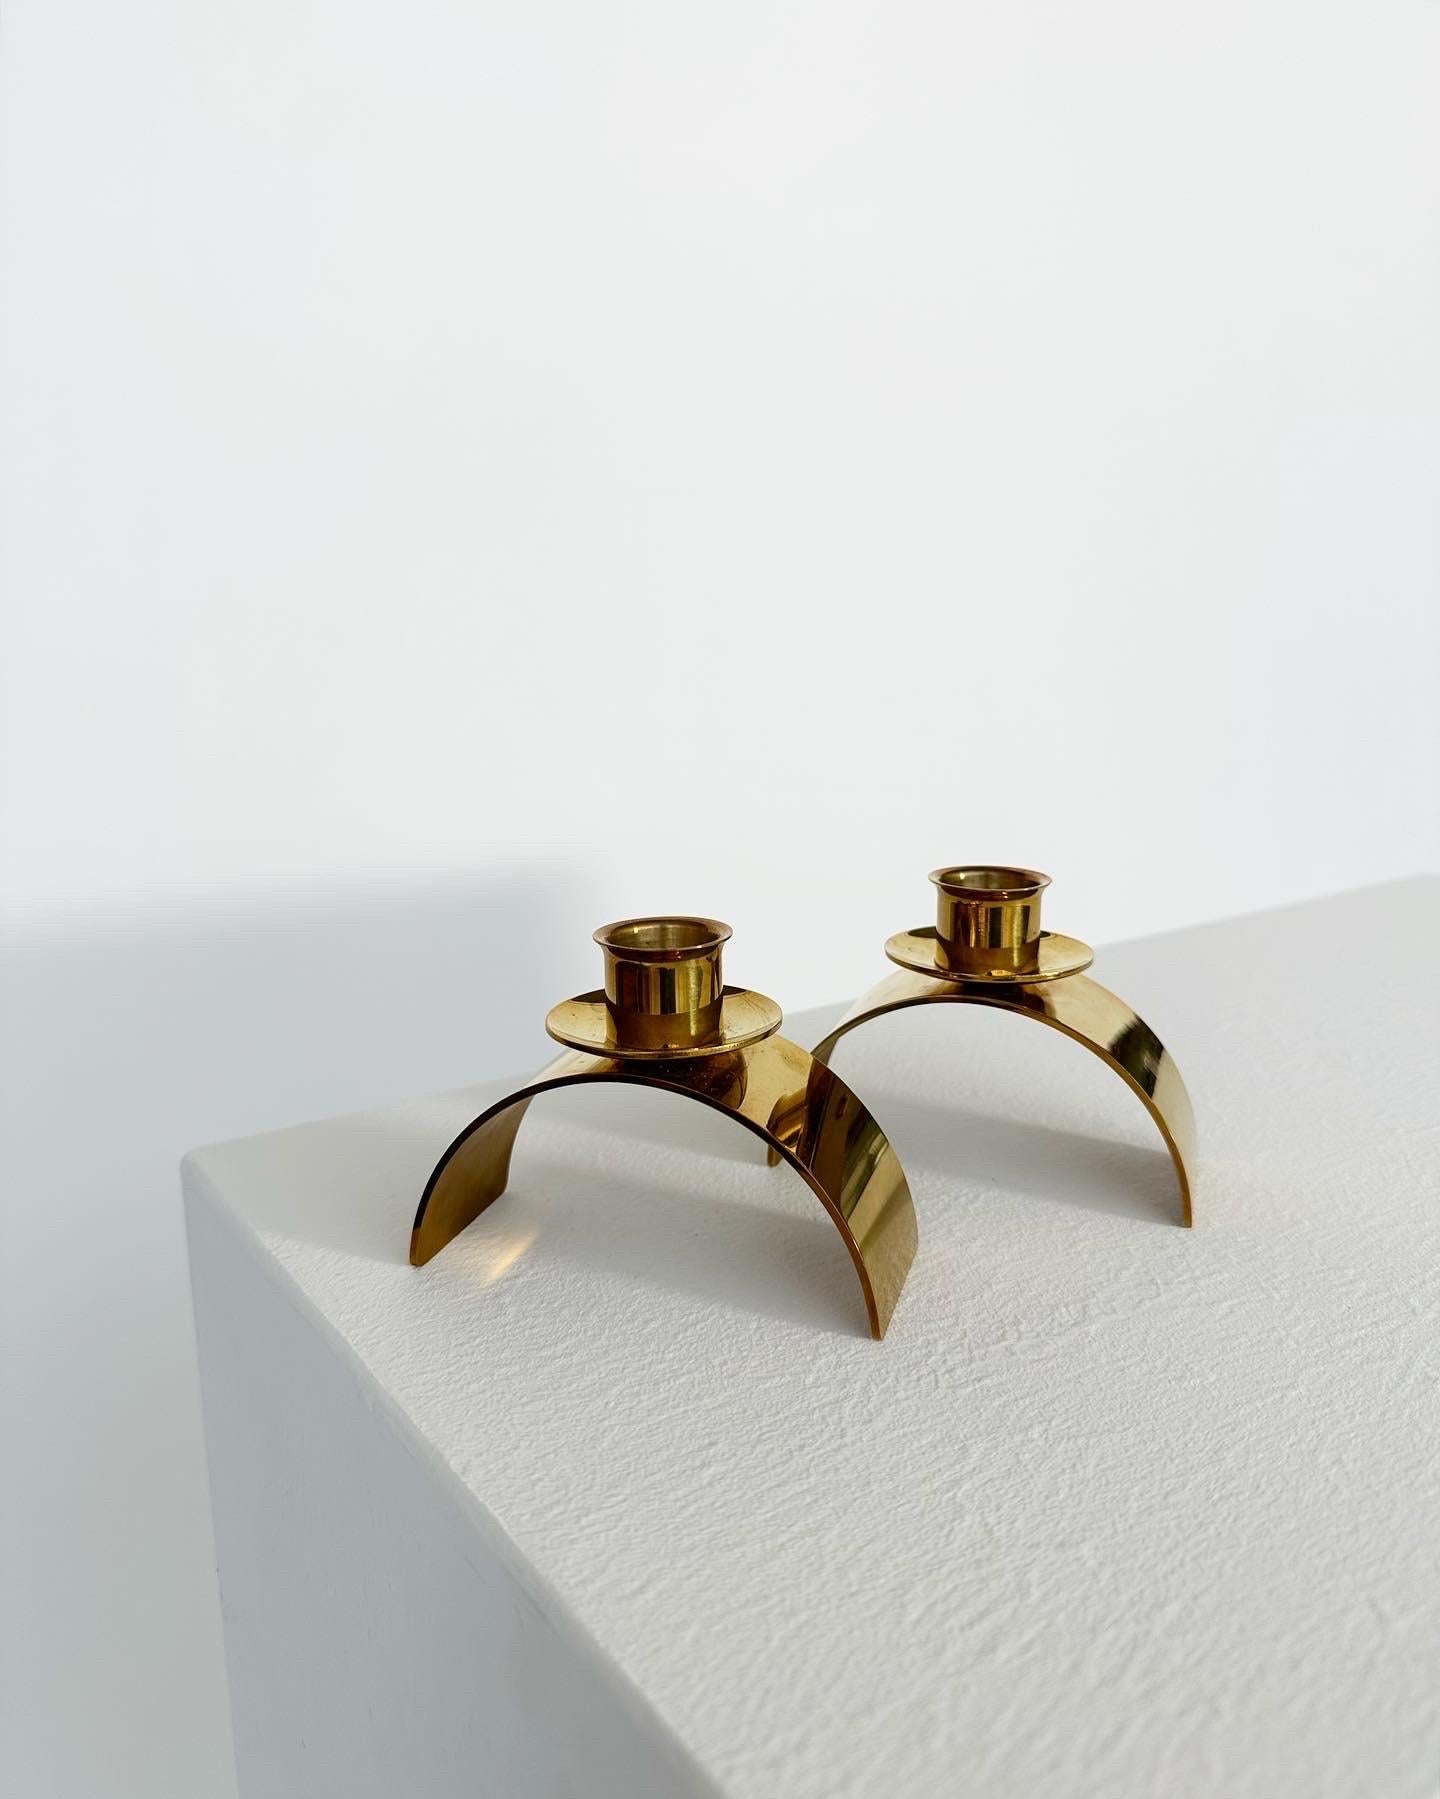 Hand-Crafted Pair of Gunnar Nylund Candle Holders Skultuna Brass Sweden, 1994 For Sale